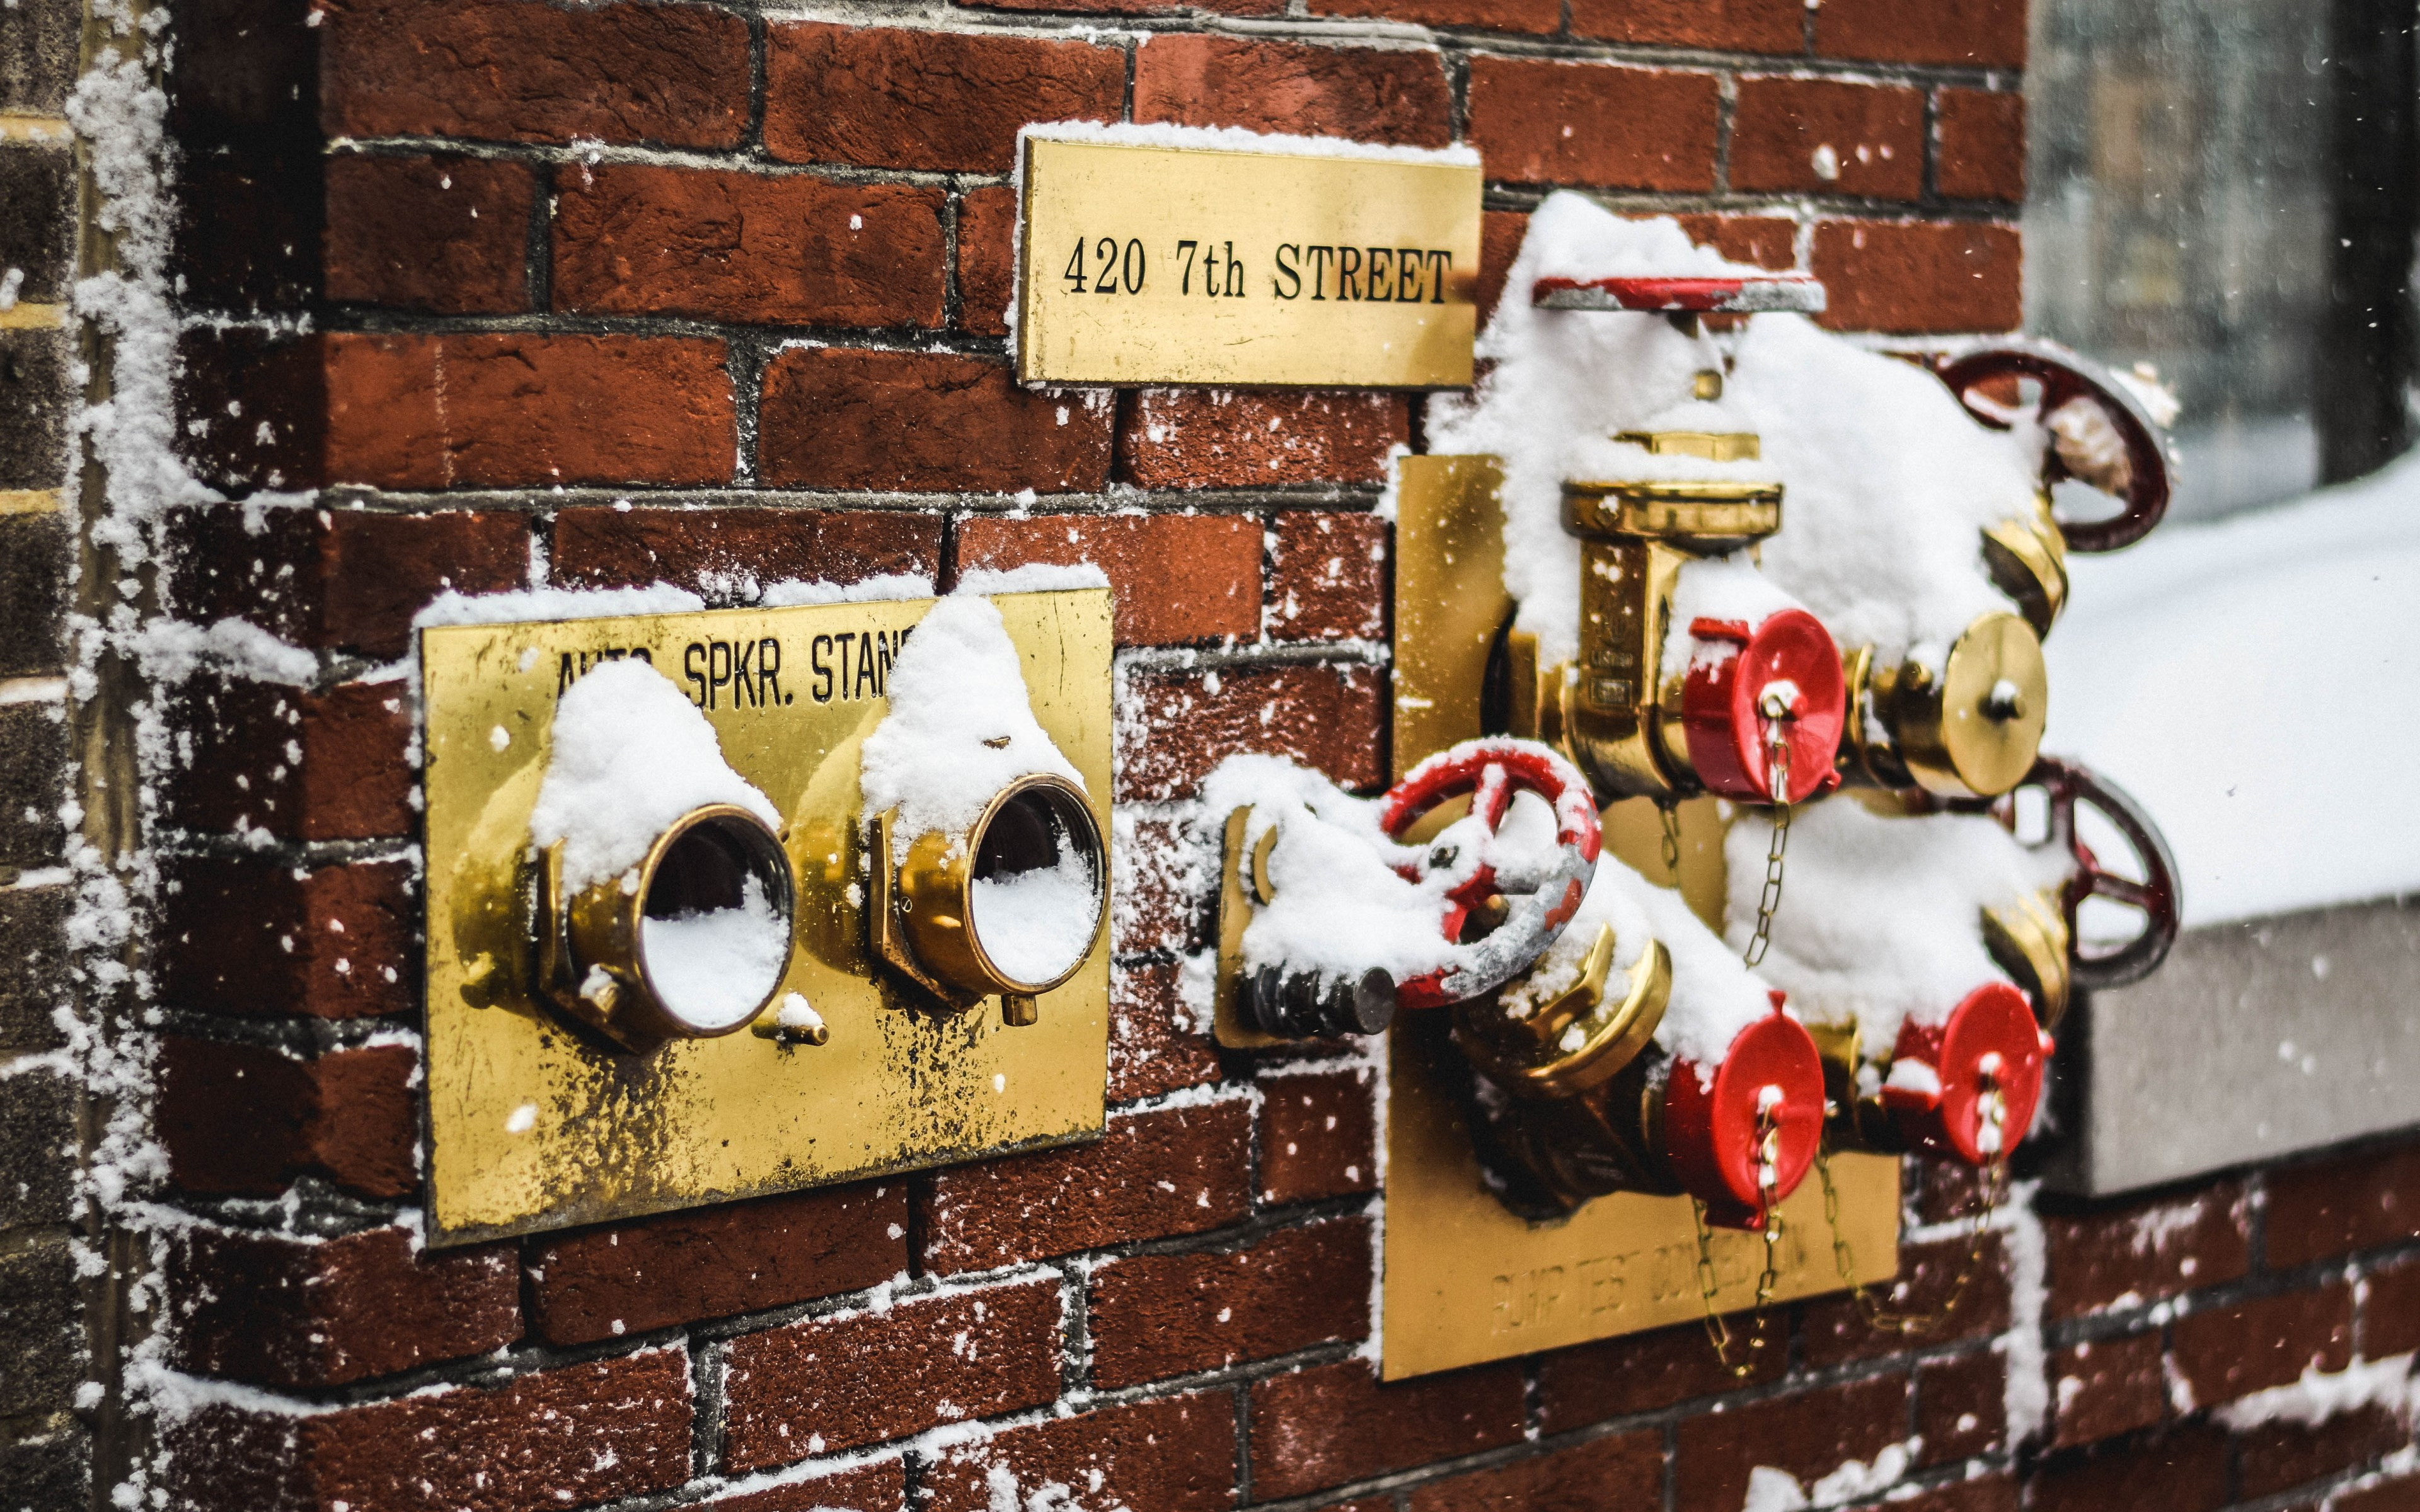 Snow covered fire standpipes in Washington wallpaper 3840x2400